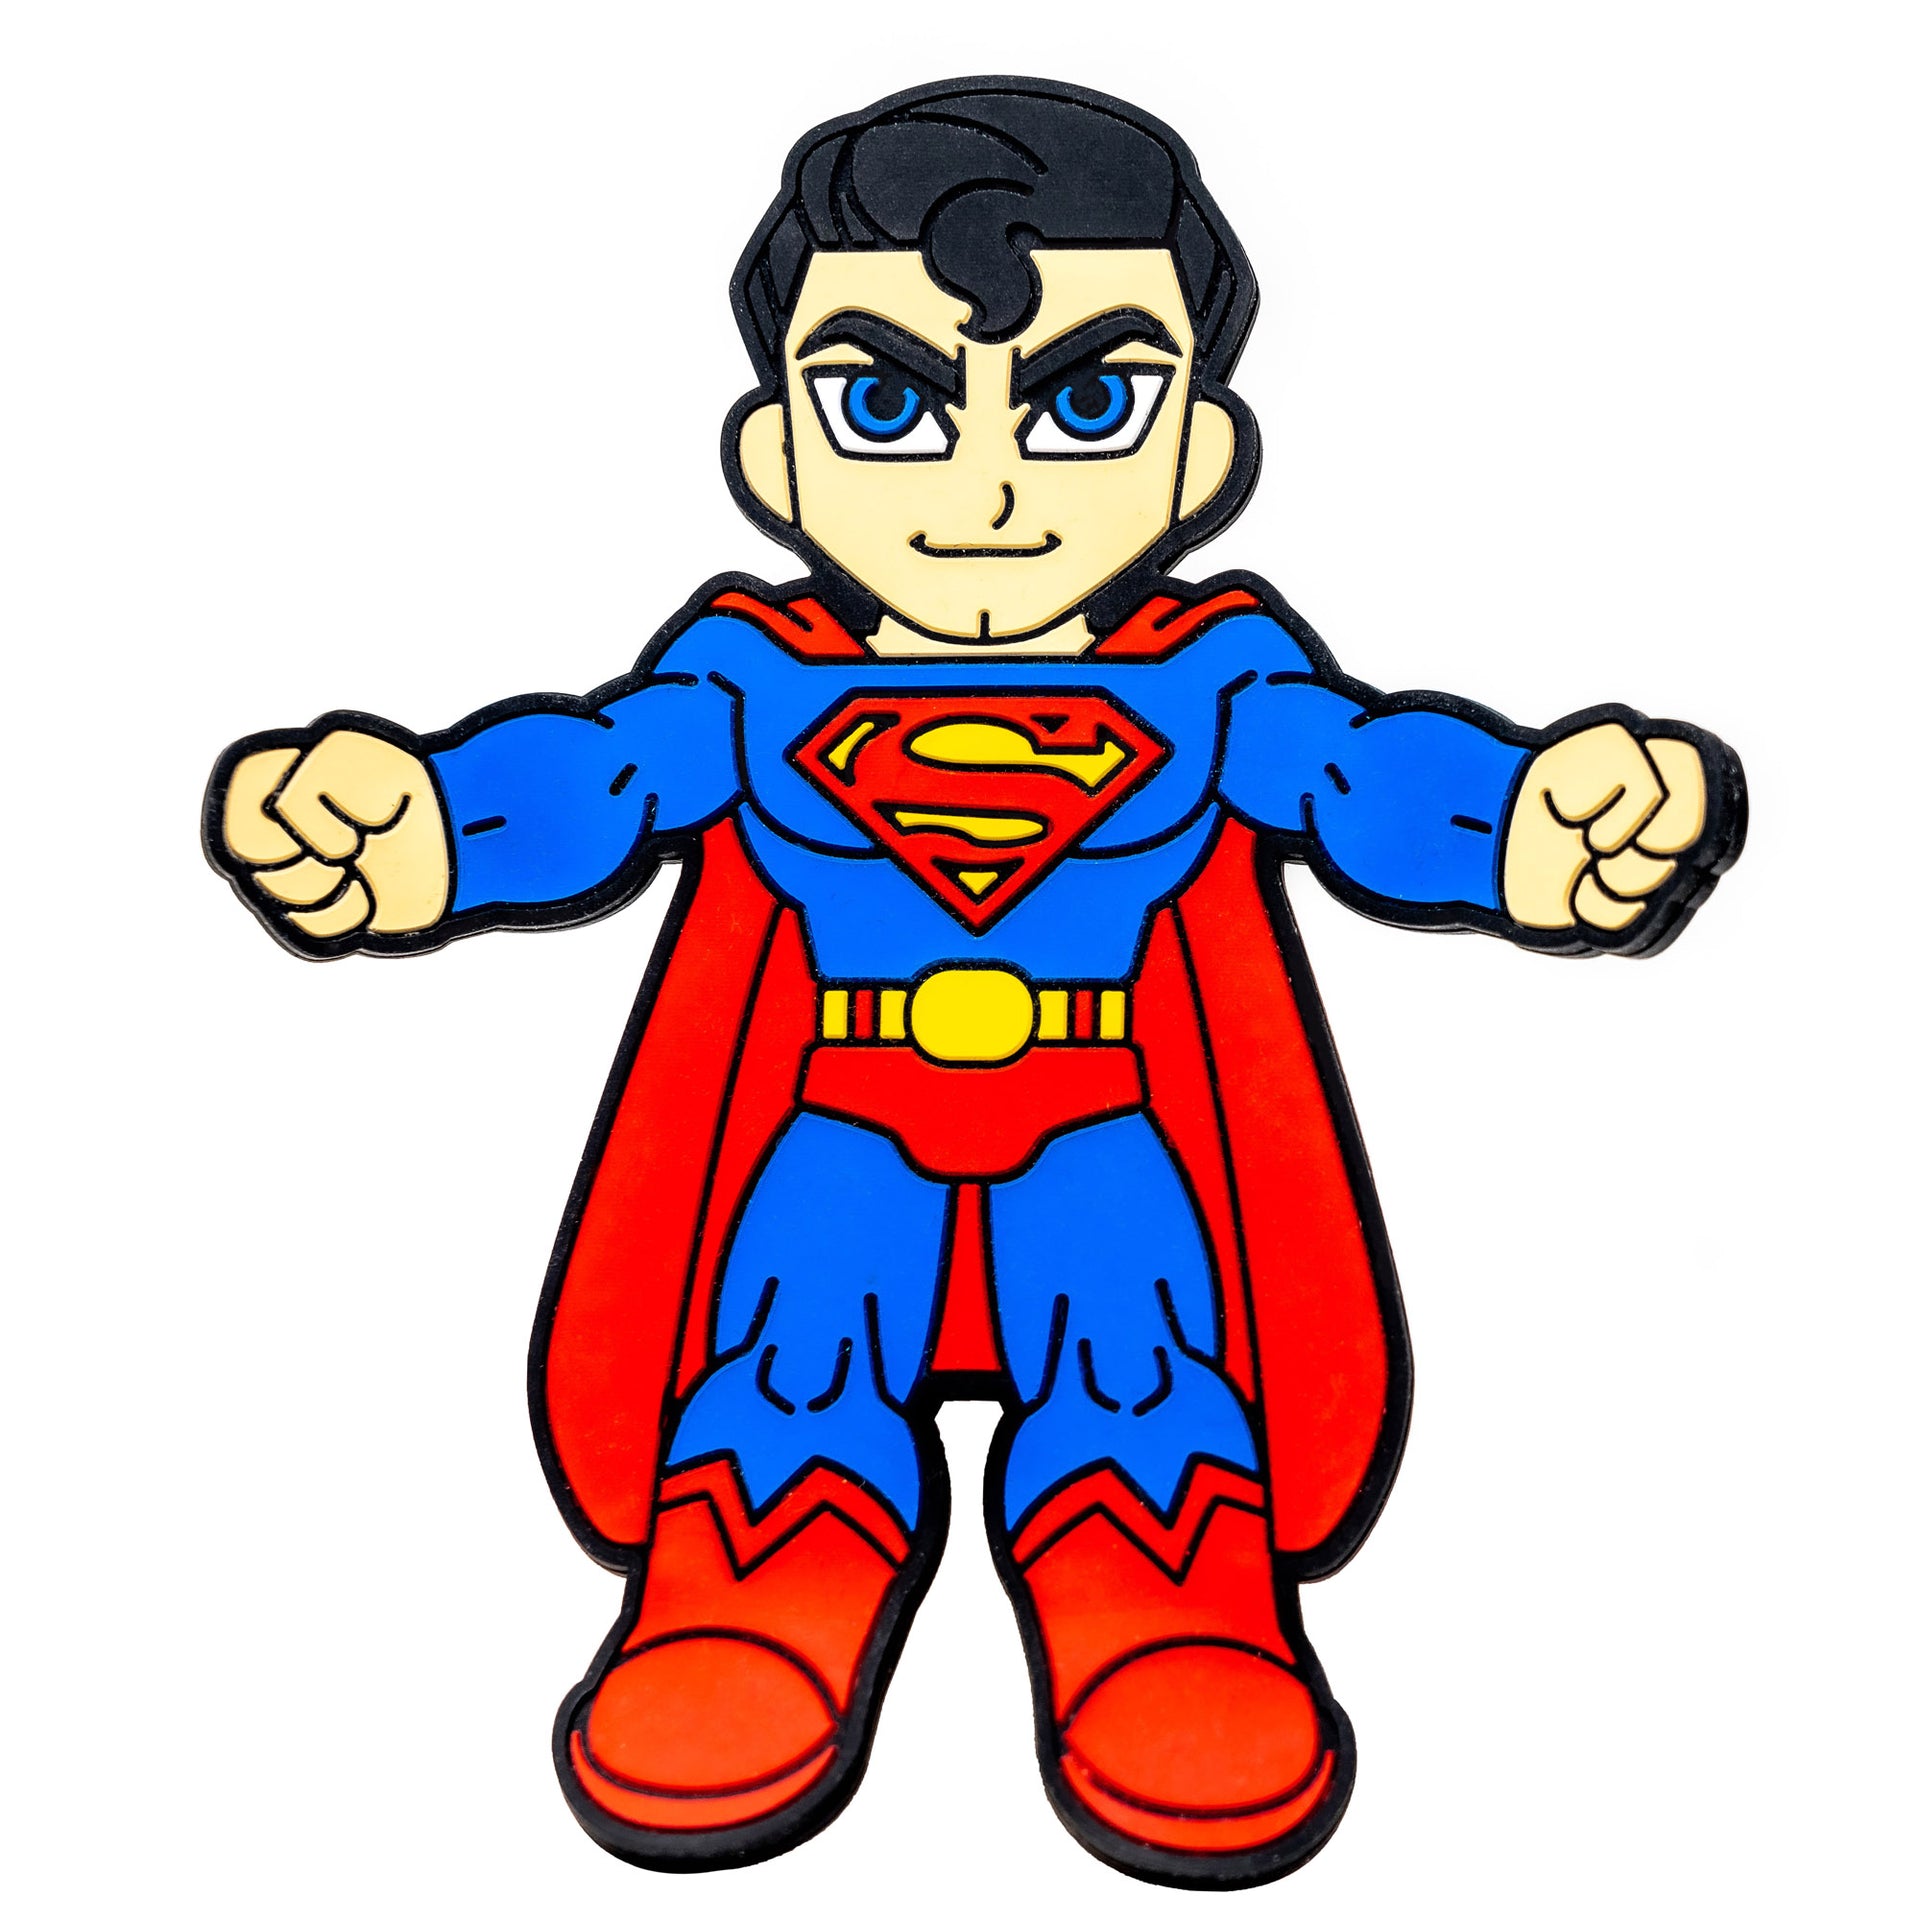 Image of DC Comics Superman Hug Buddy on a white background with arms and legs spread in the open position